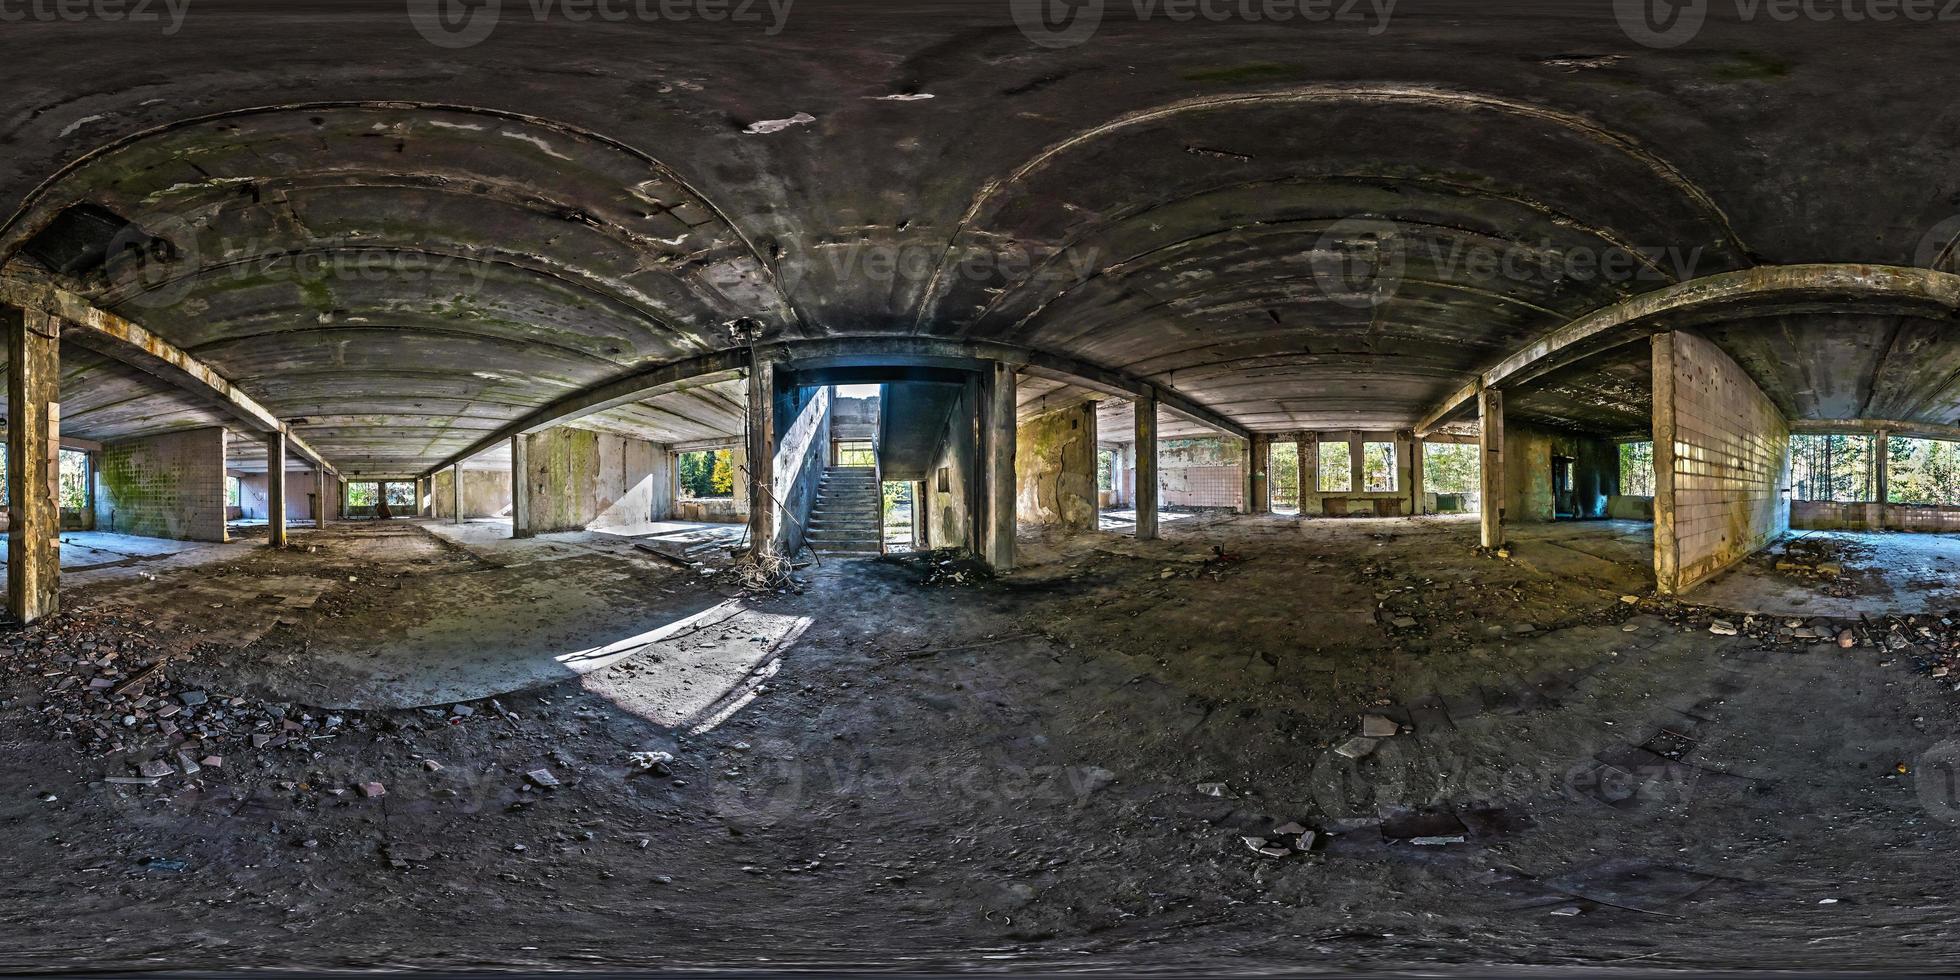 Full spherical seamless hdri panorama 360 degrees angle view concrete structures abandoned unfinished building.  360 panorama in equirectangular equidistant projection, VR AR content photo